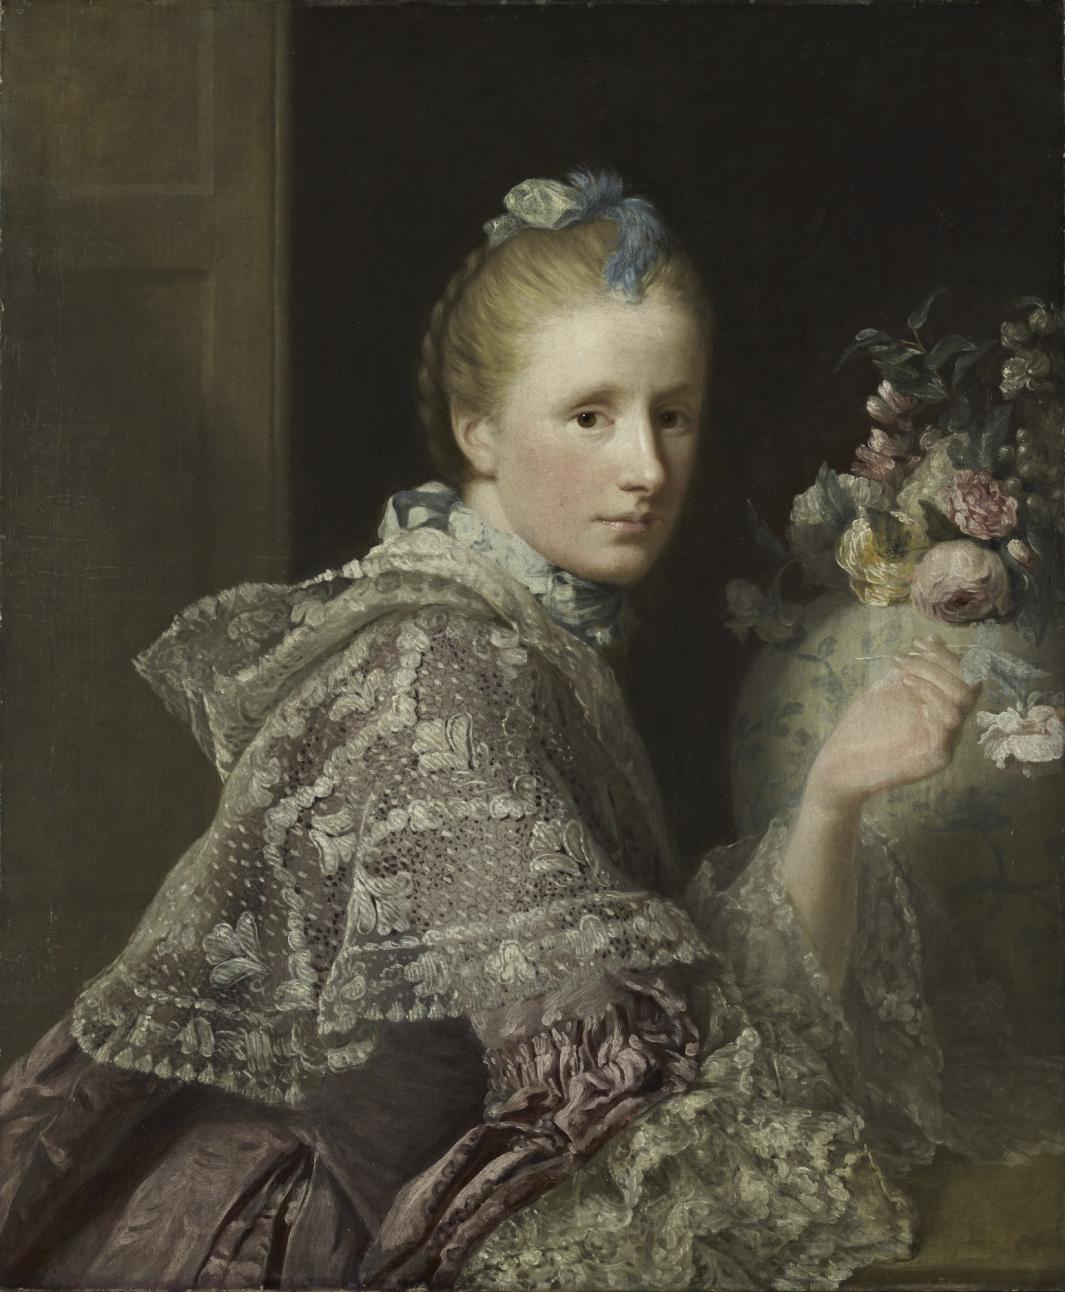 Oil painting of woman looking over right should with vase of flowers in background